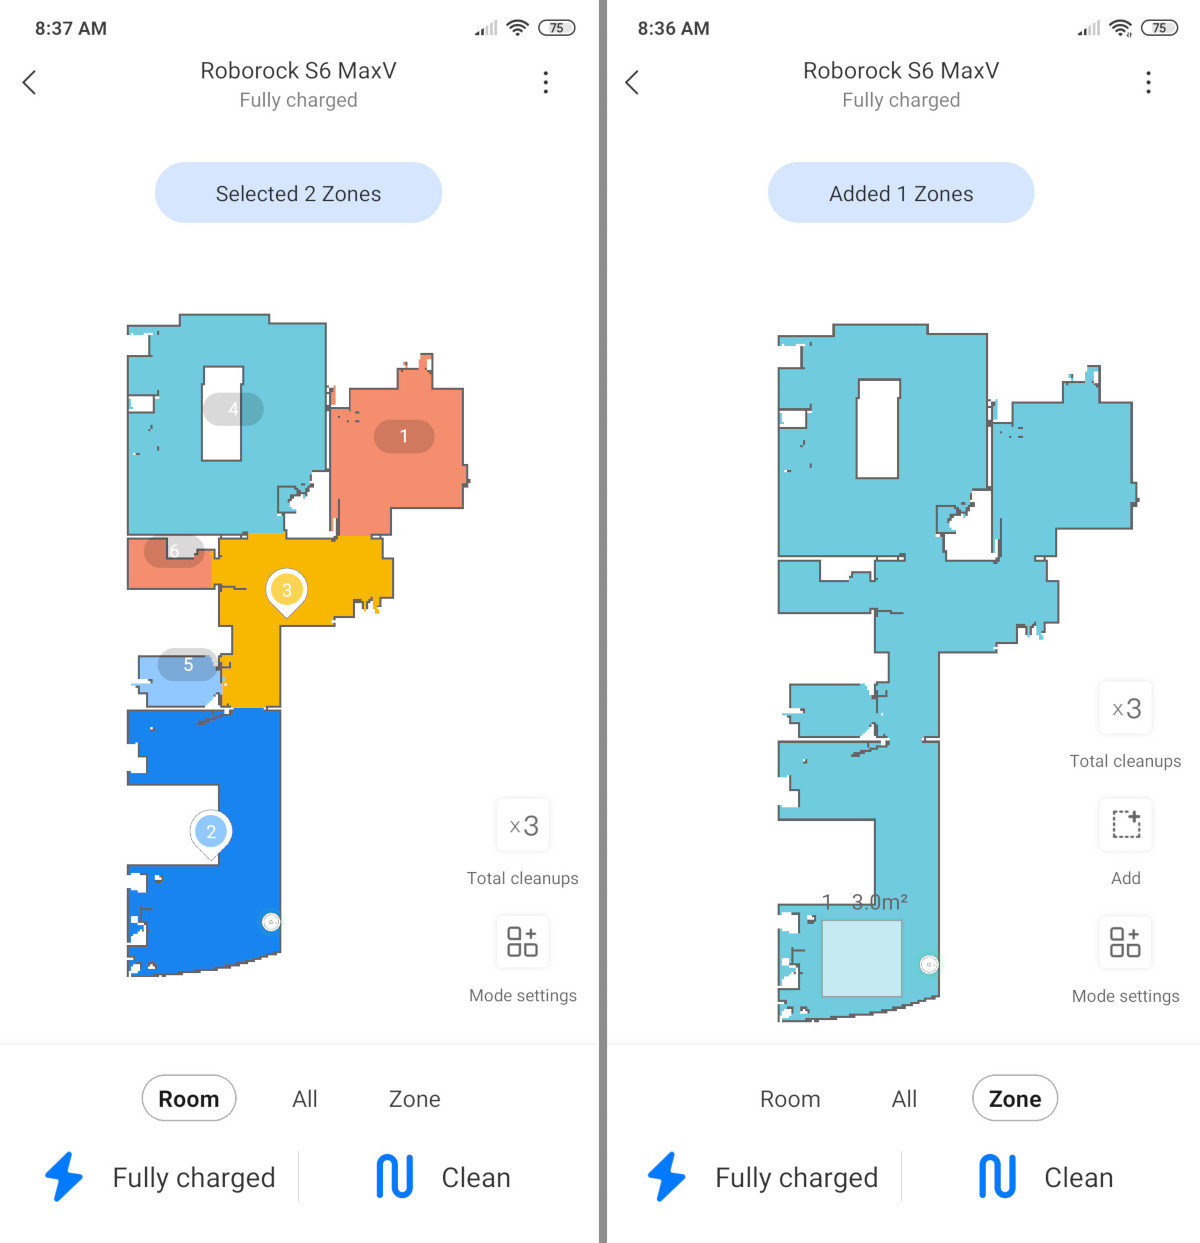 Roborock app: room cleaning (left) and zoned cleaning (right)